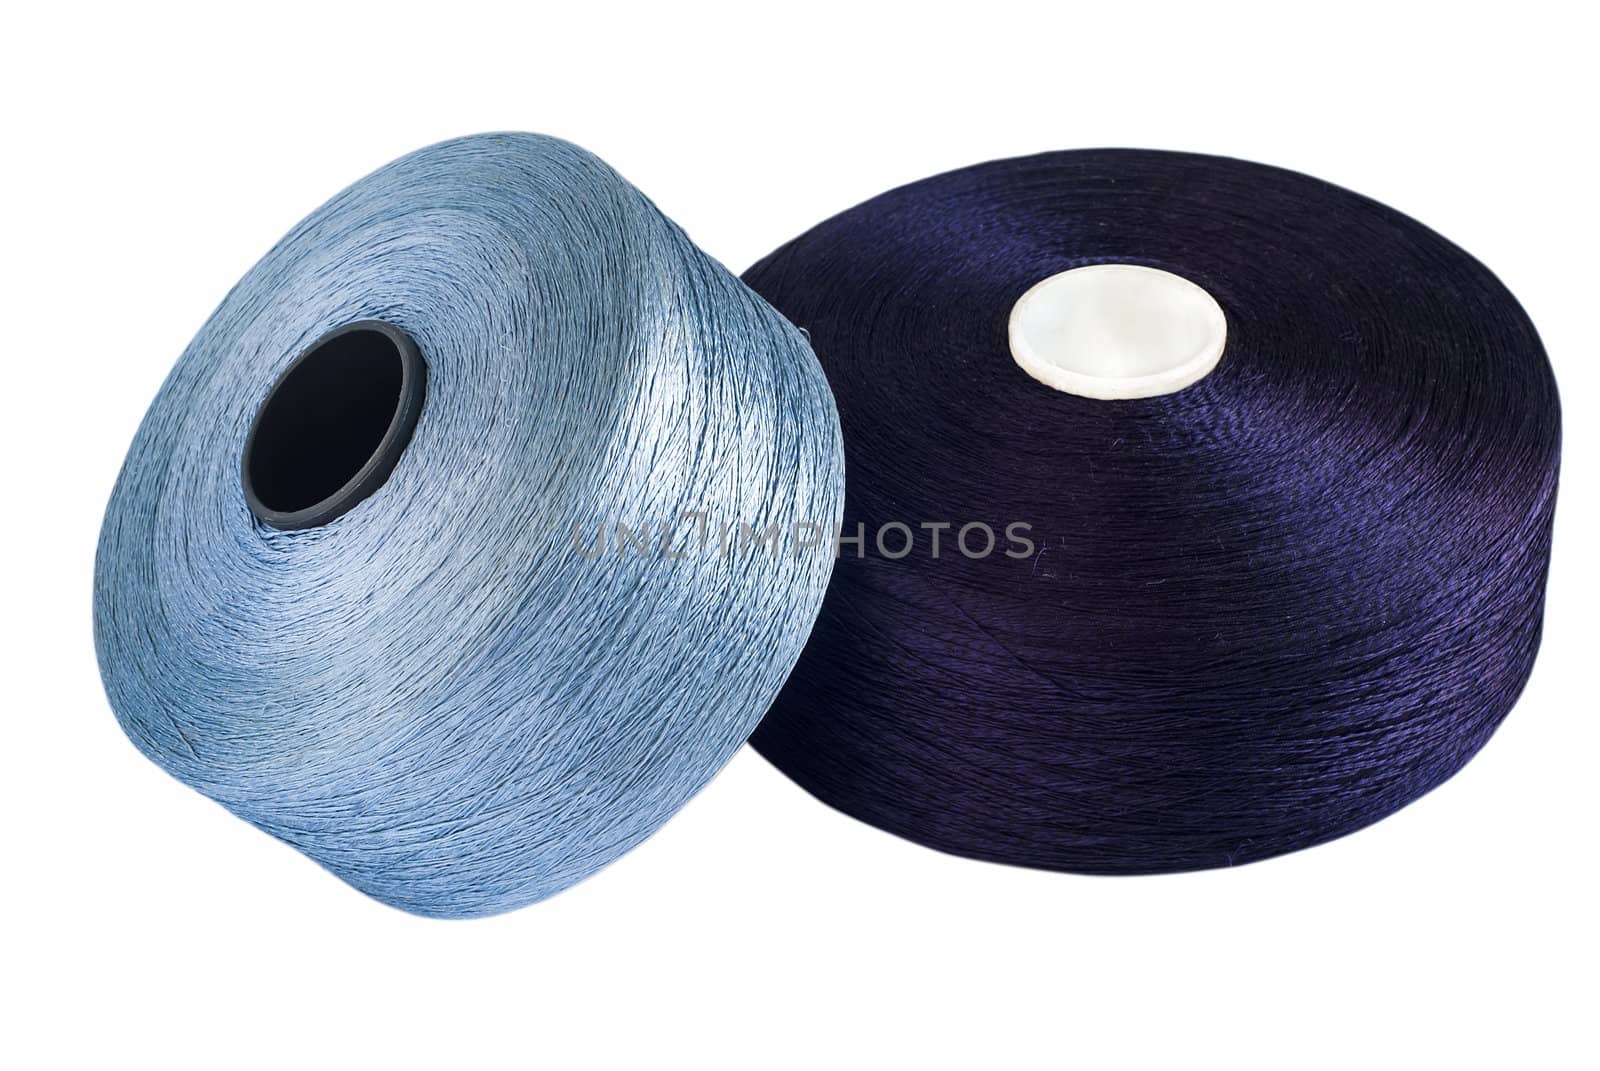 Blue silk yarn rolled on coils isolated on white background